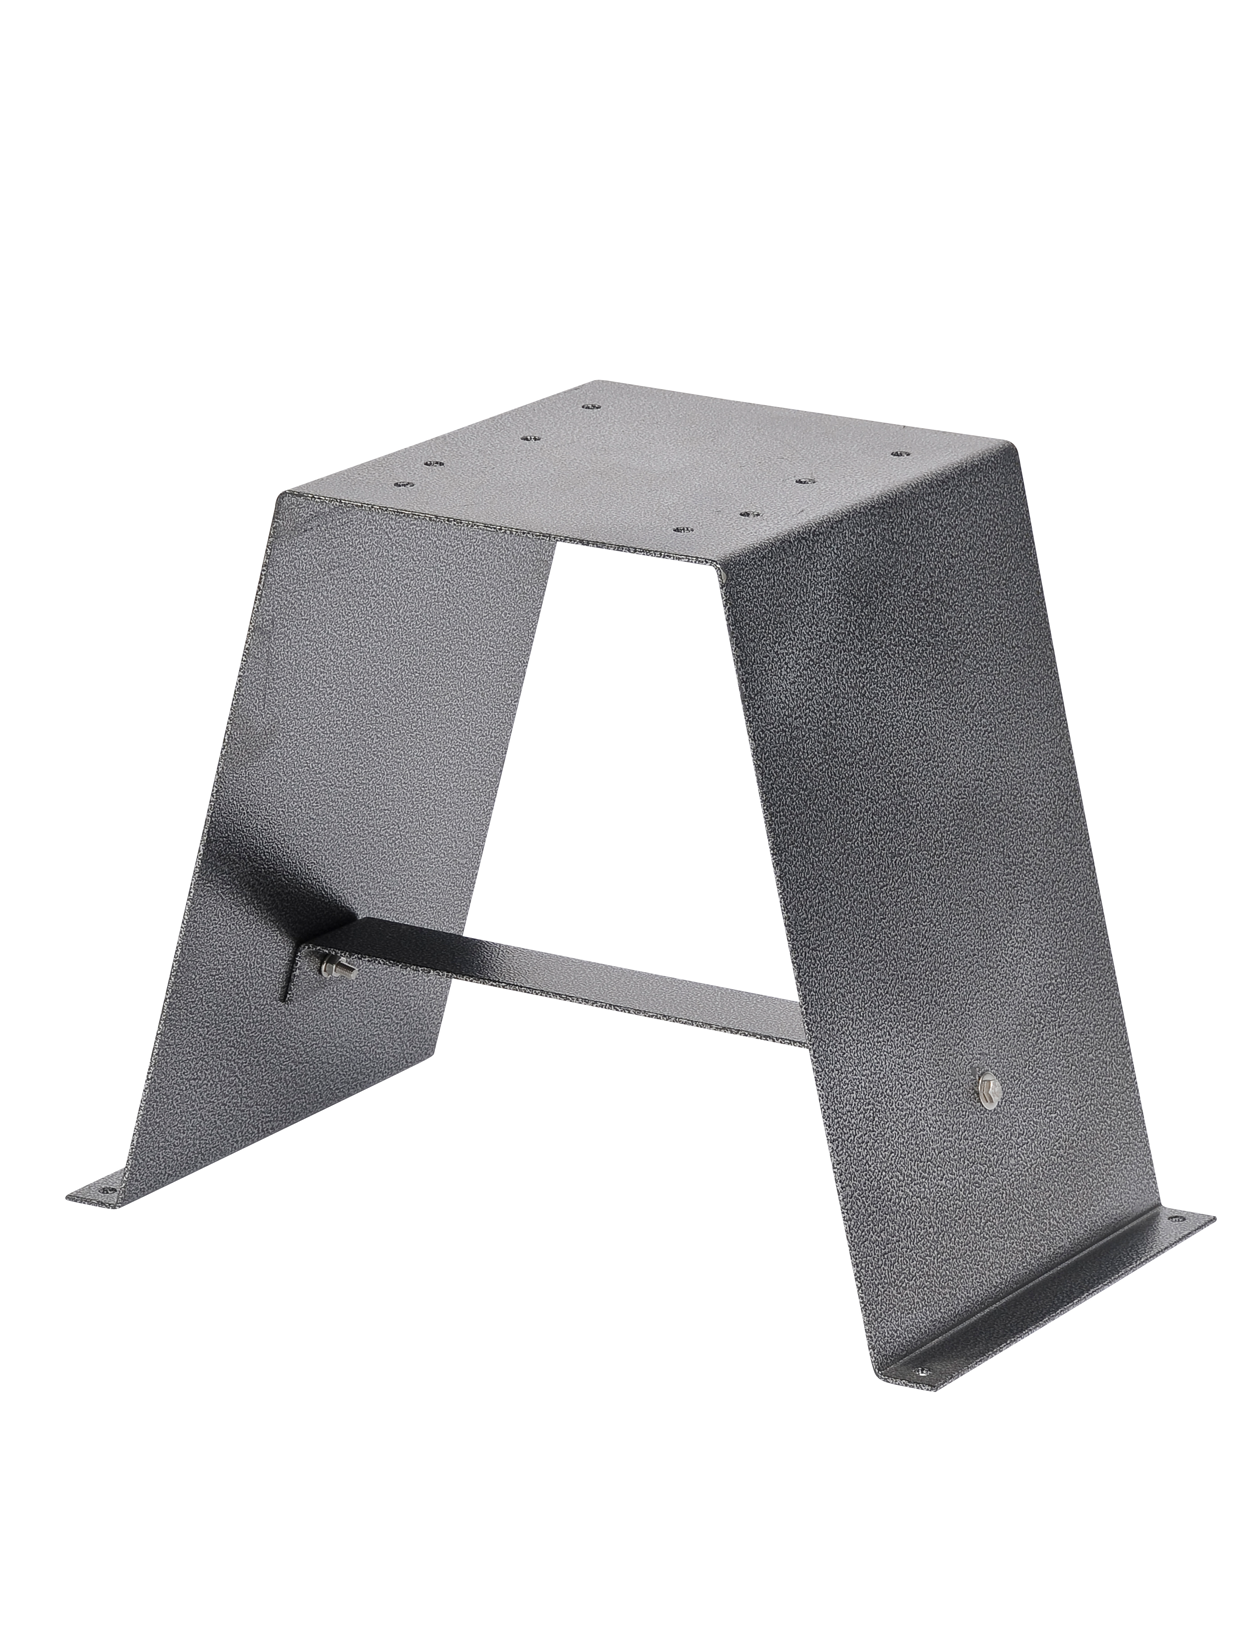 Pickled steel support and mounting assembly for corrosion and explosion resistant fans and motors